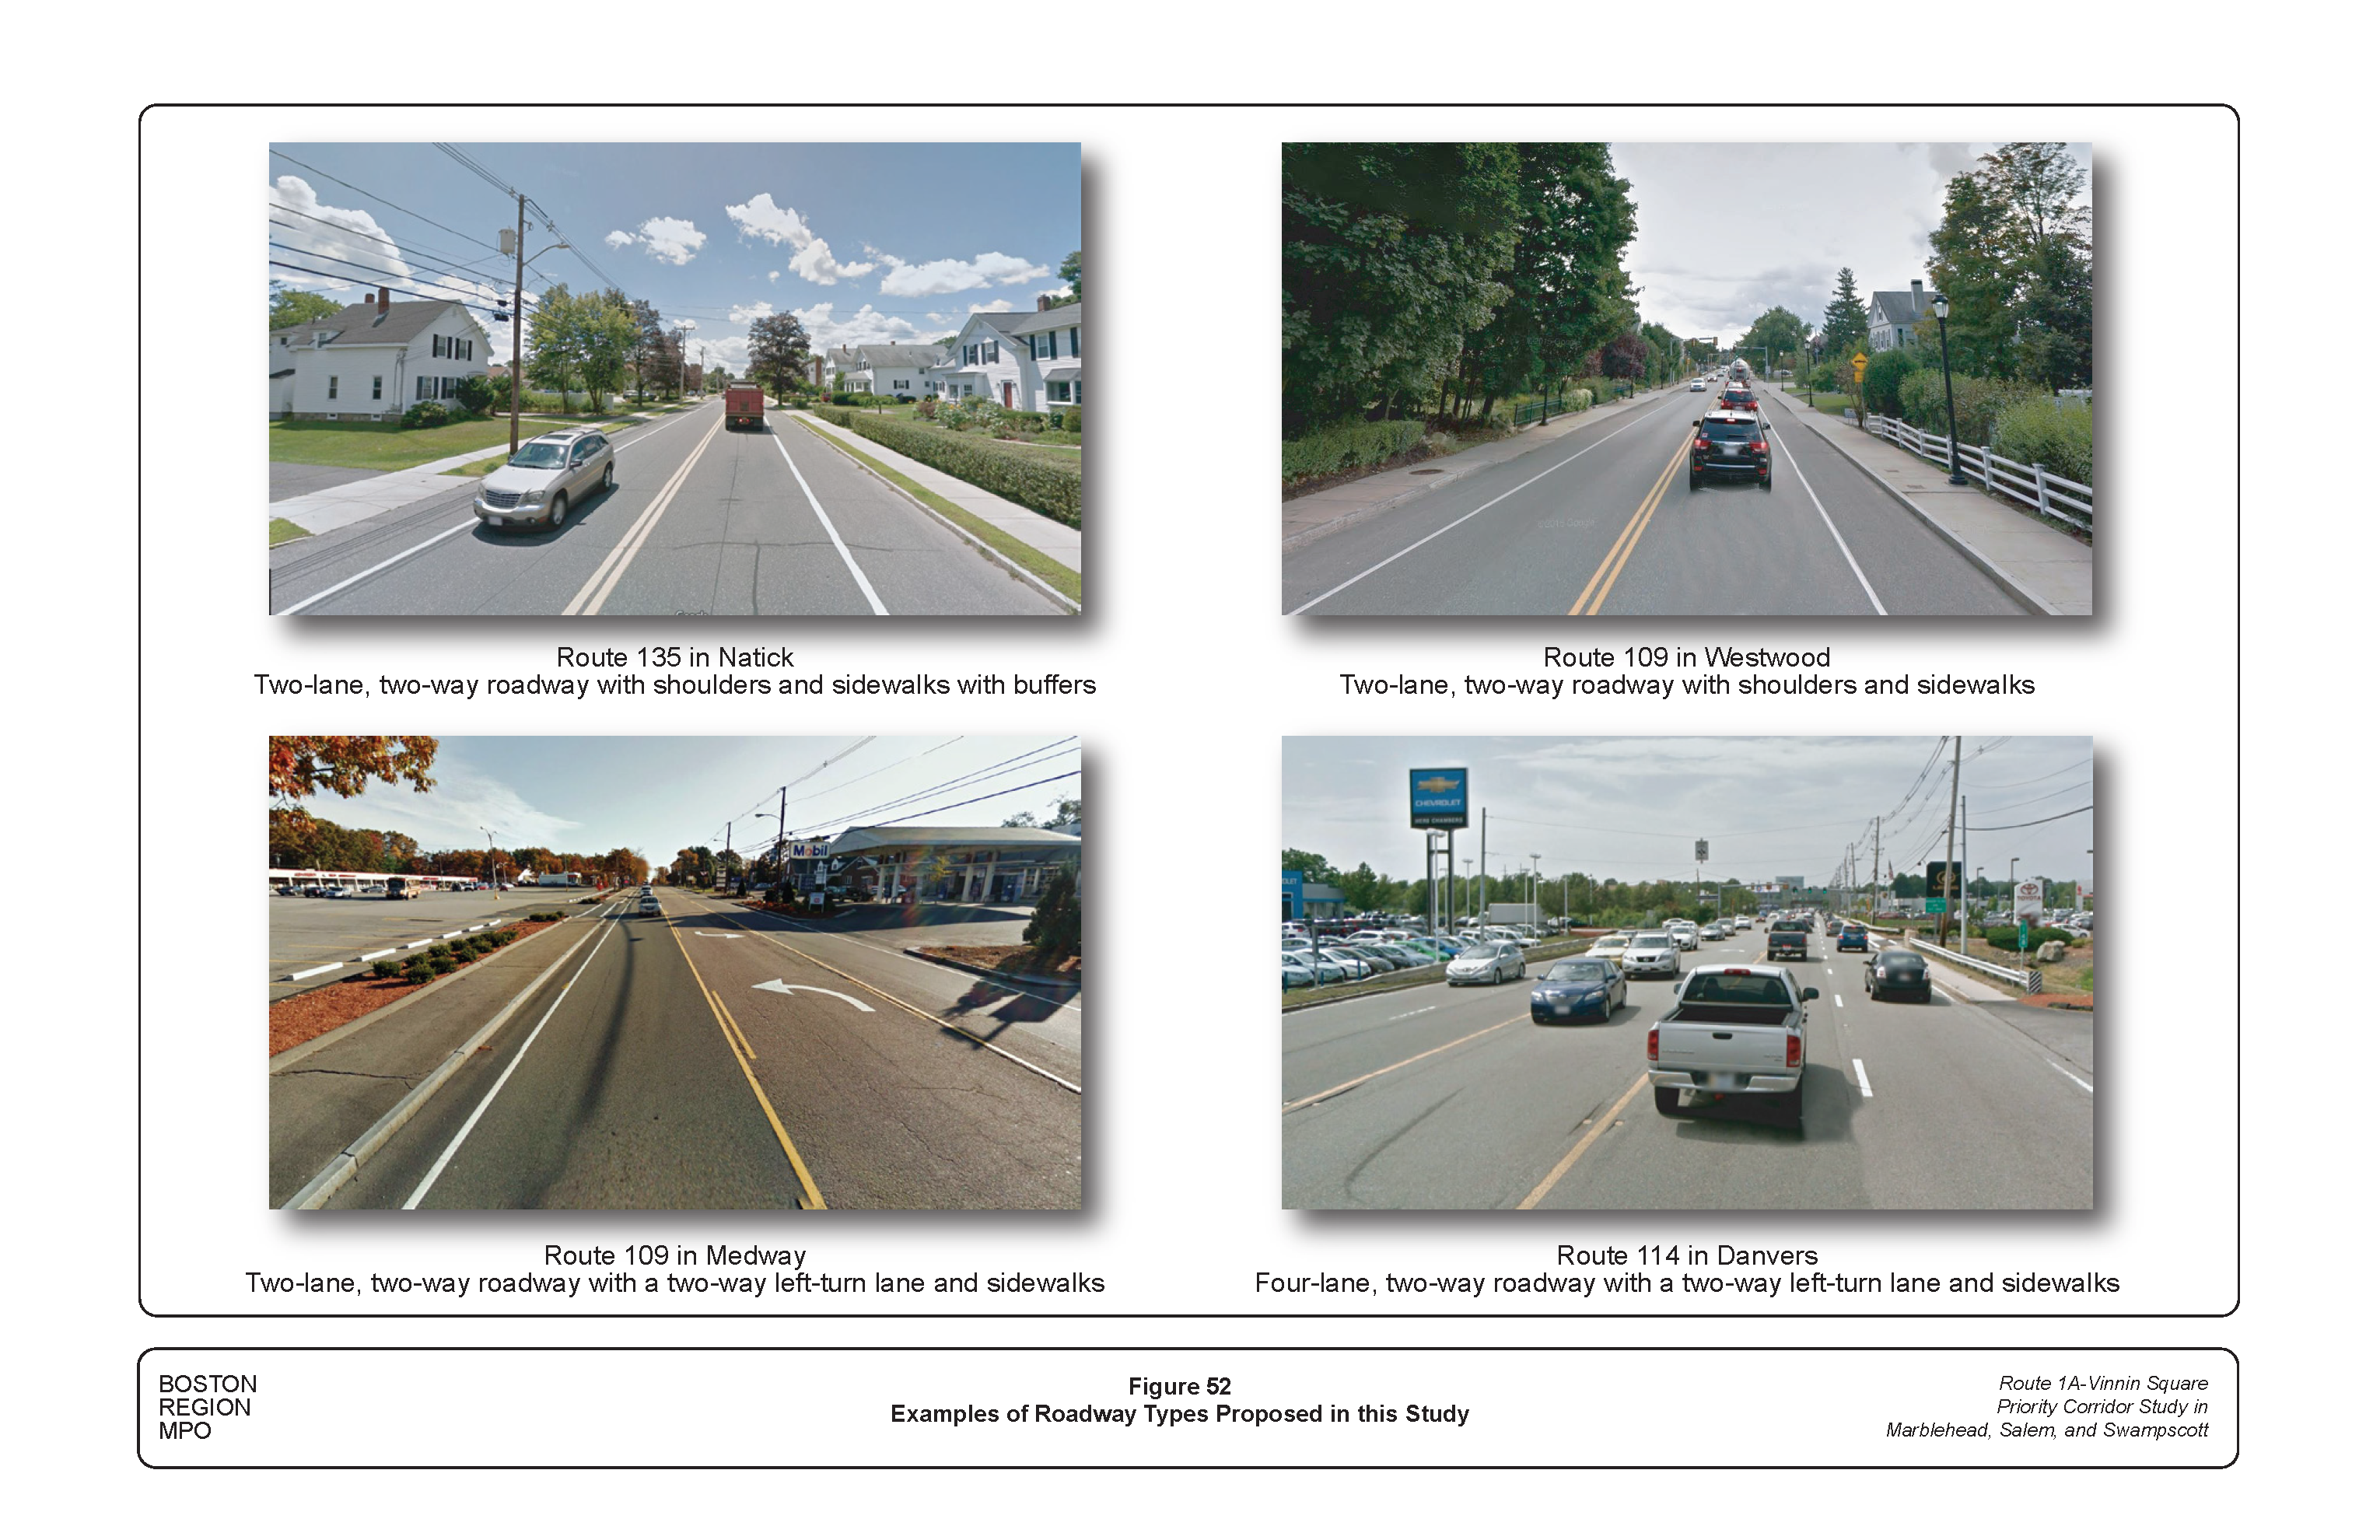 FIGURE 52. Examples of Roadways Proposed in this Study.Figure 21 contains four photographs showing examples of roadway types proposed in this study. The photographs show various lane configurations.